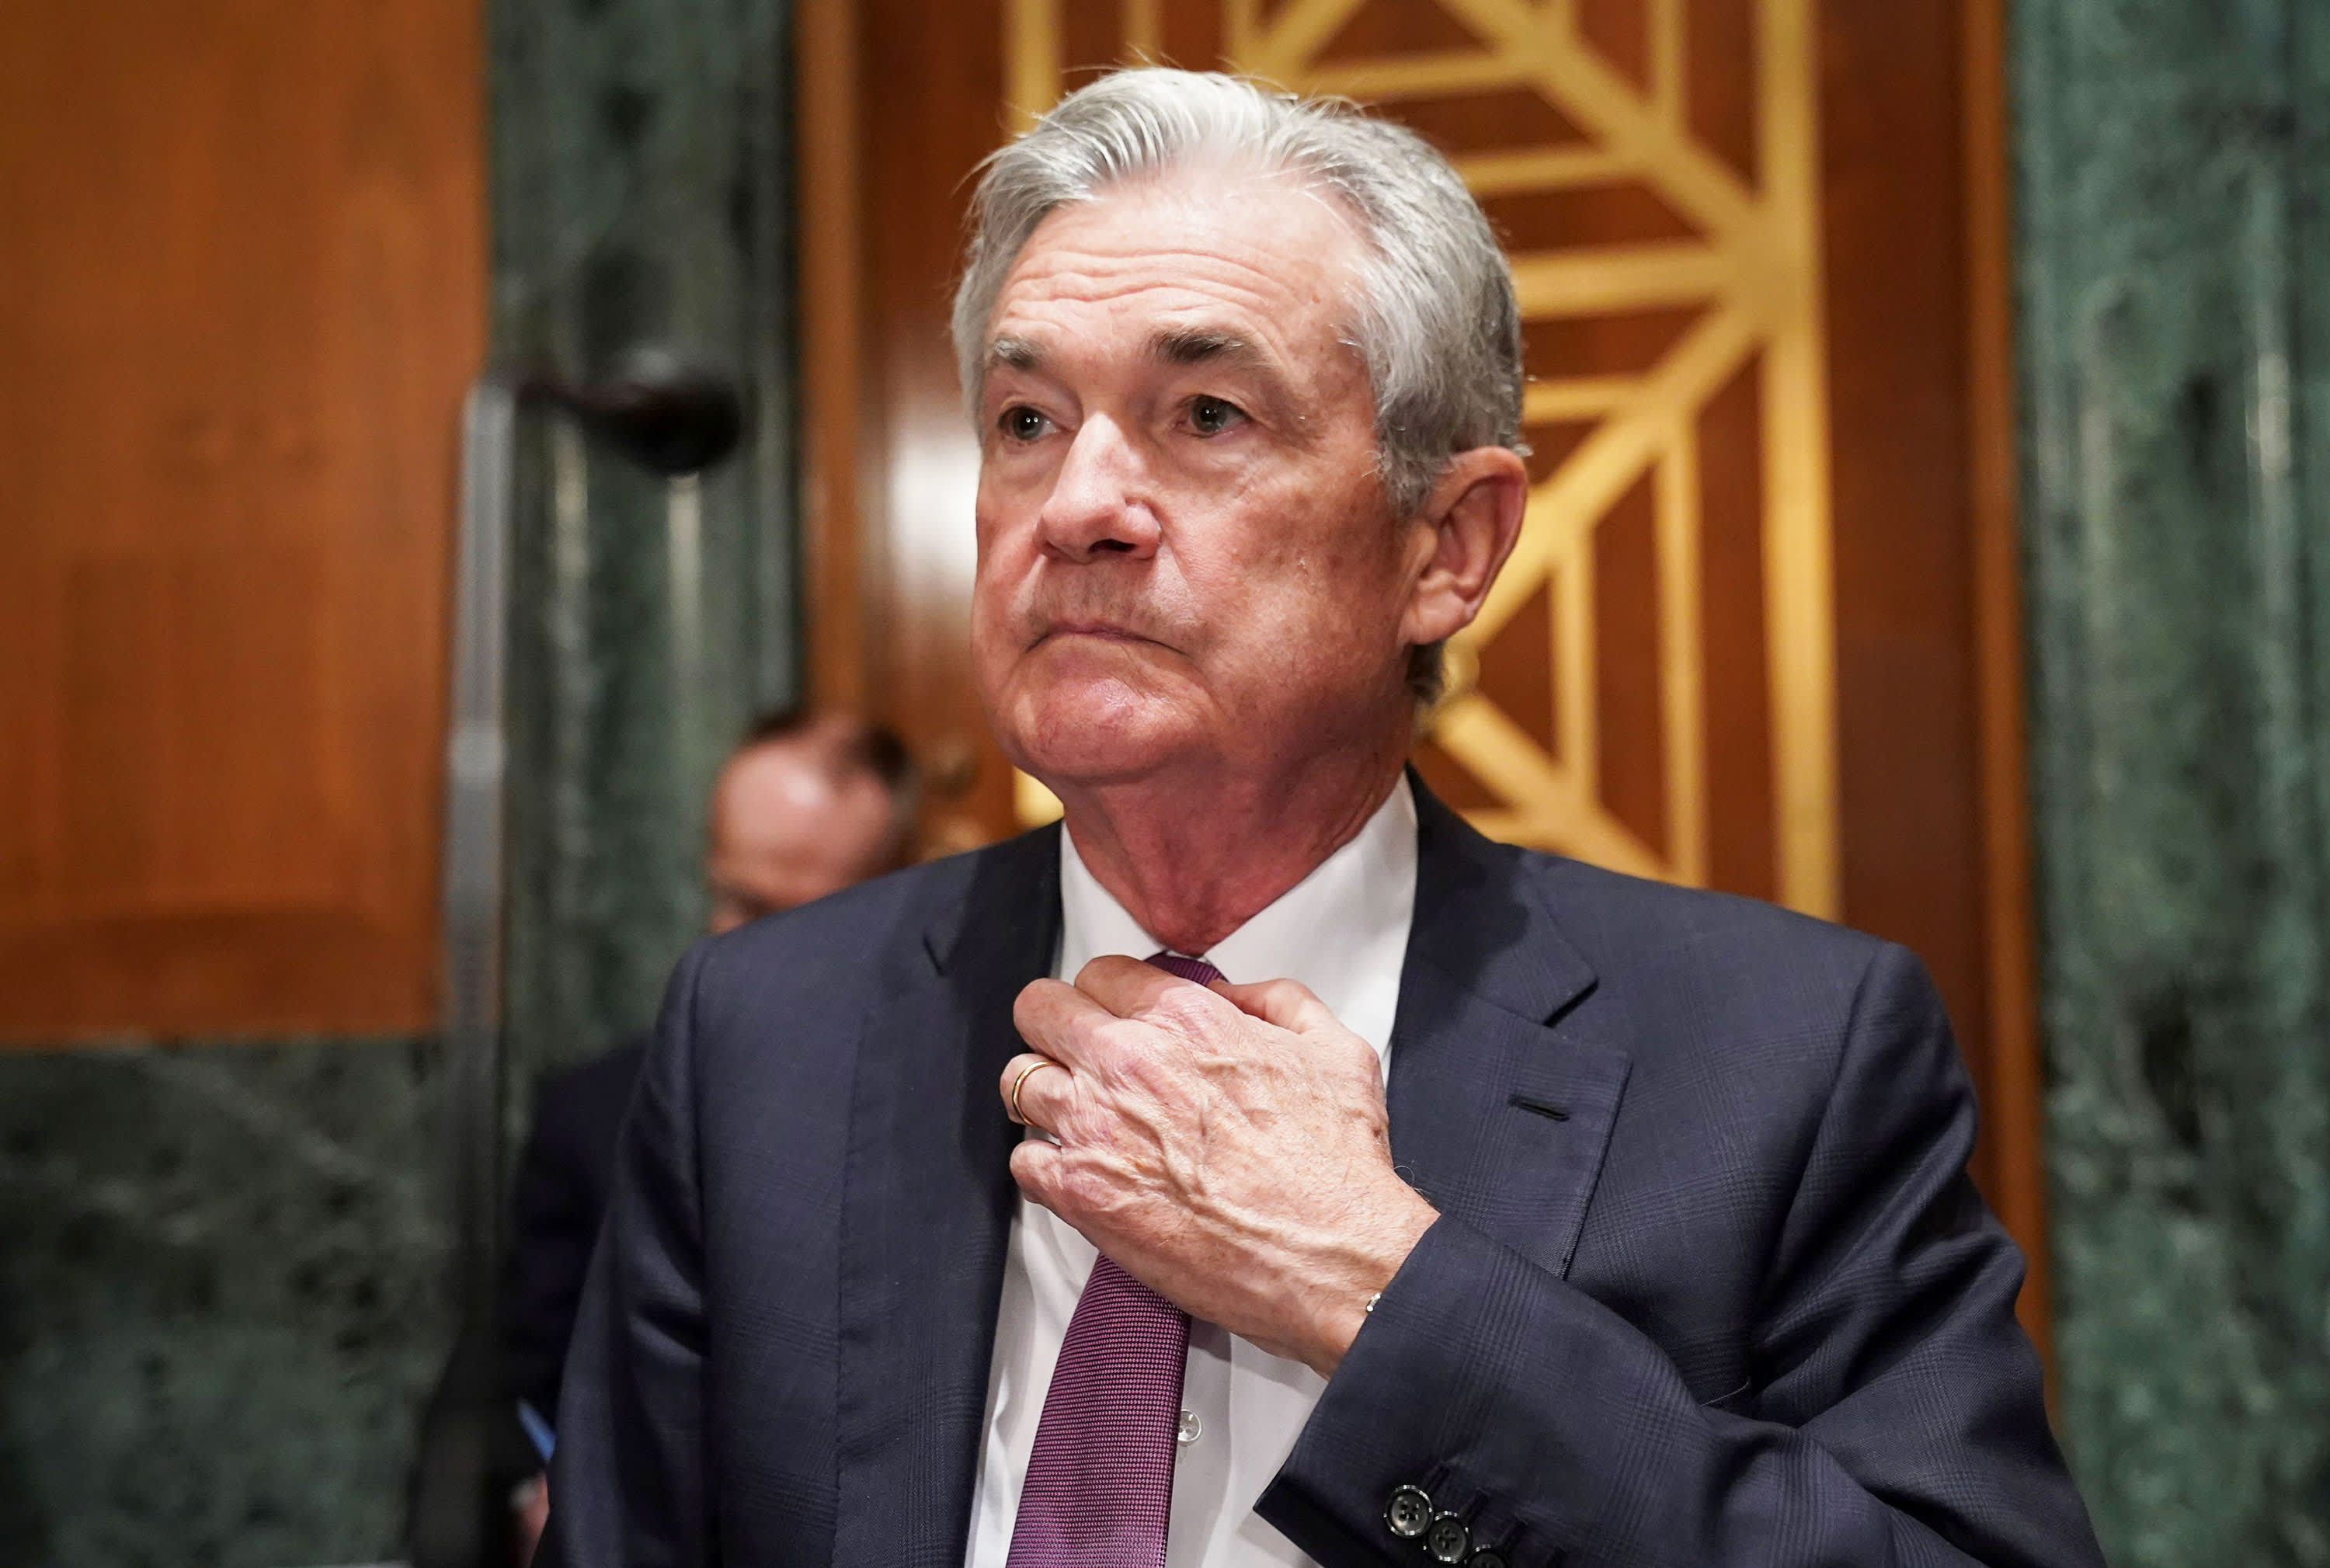 Federal Reserve holds interest rates steady says tapering of bond buying coming ‘soon’ – CNBC